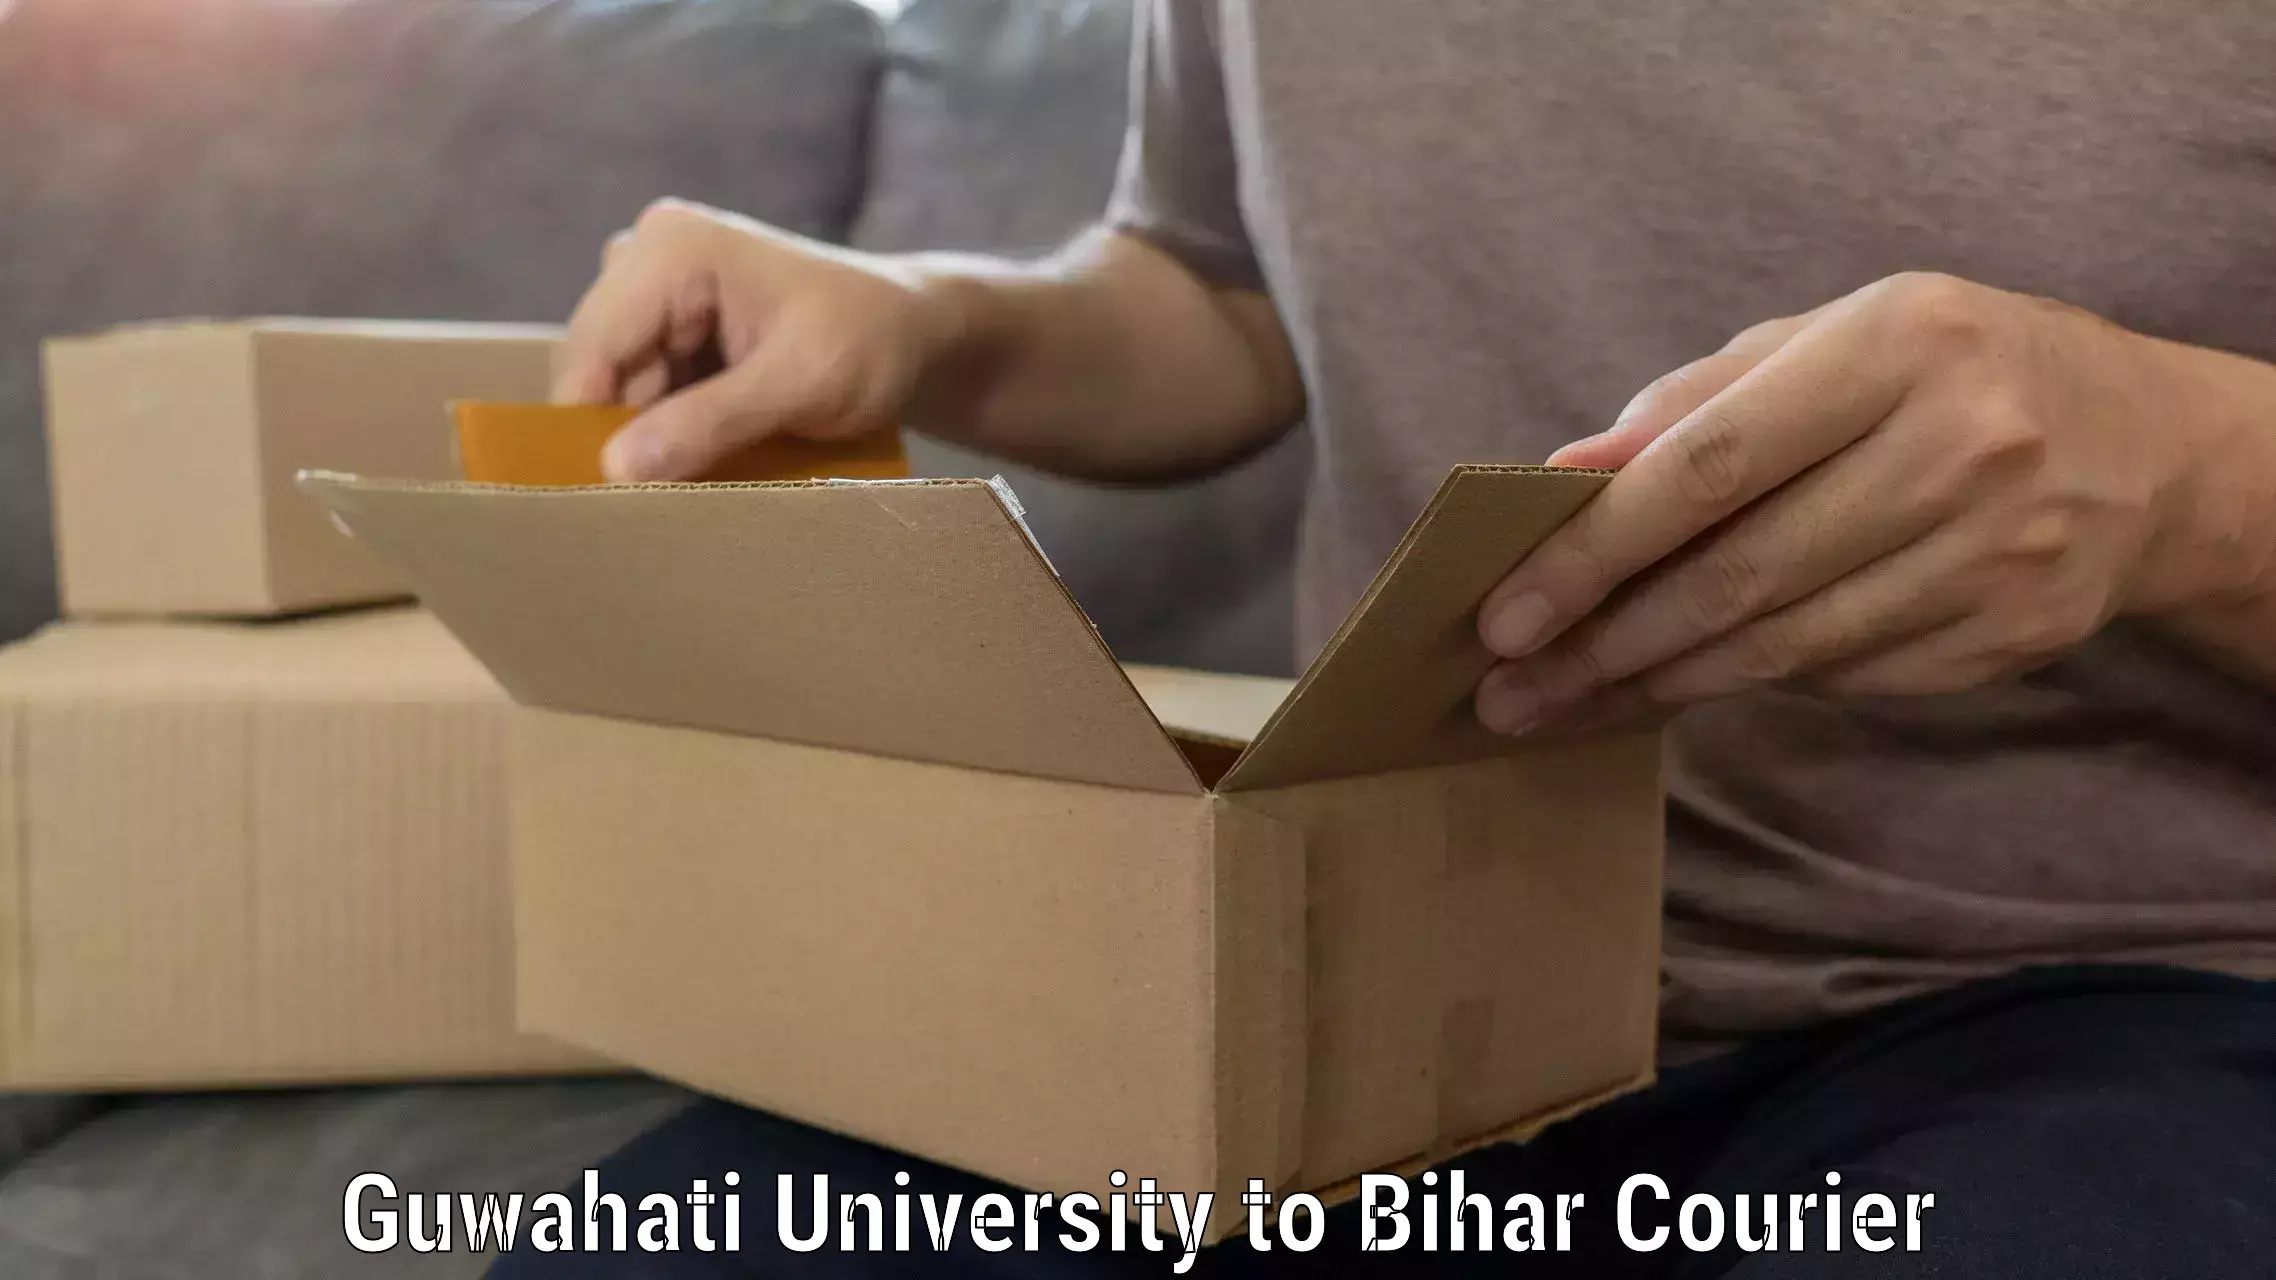 Furniture transport specialists Guwahati University to Rohtas